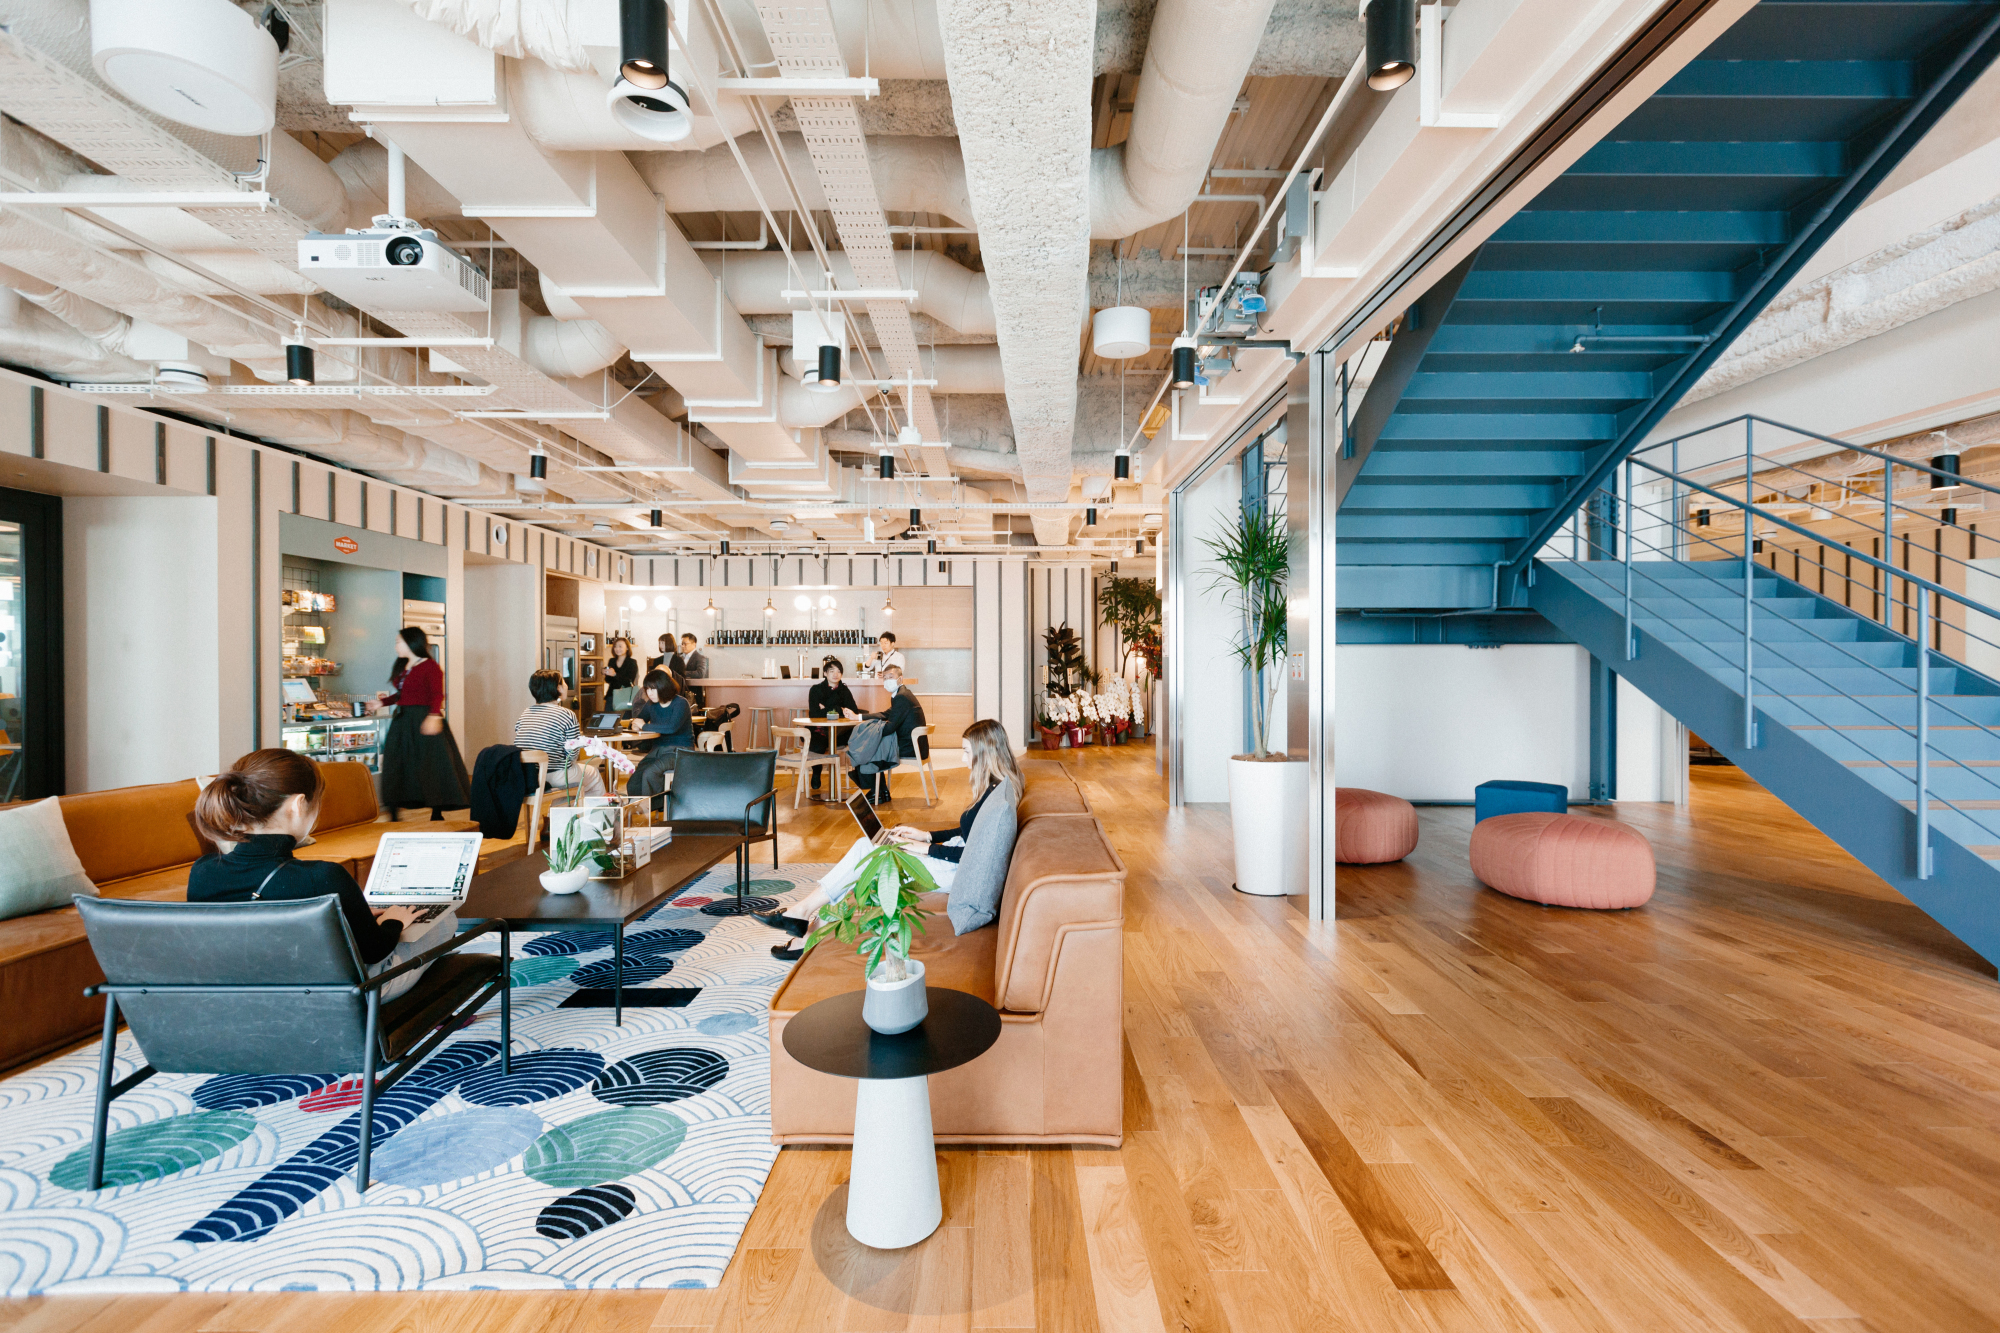 Shared office space at WeWork. | COURTESY OF WEWORK